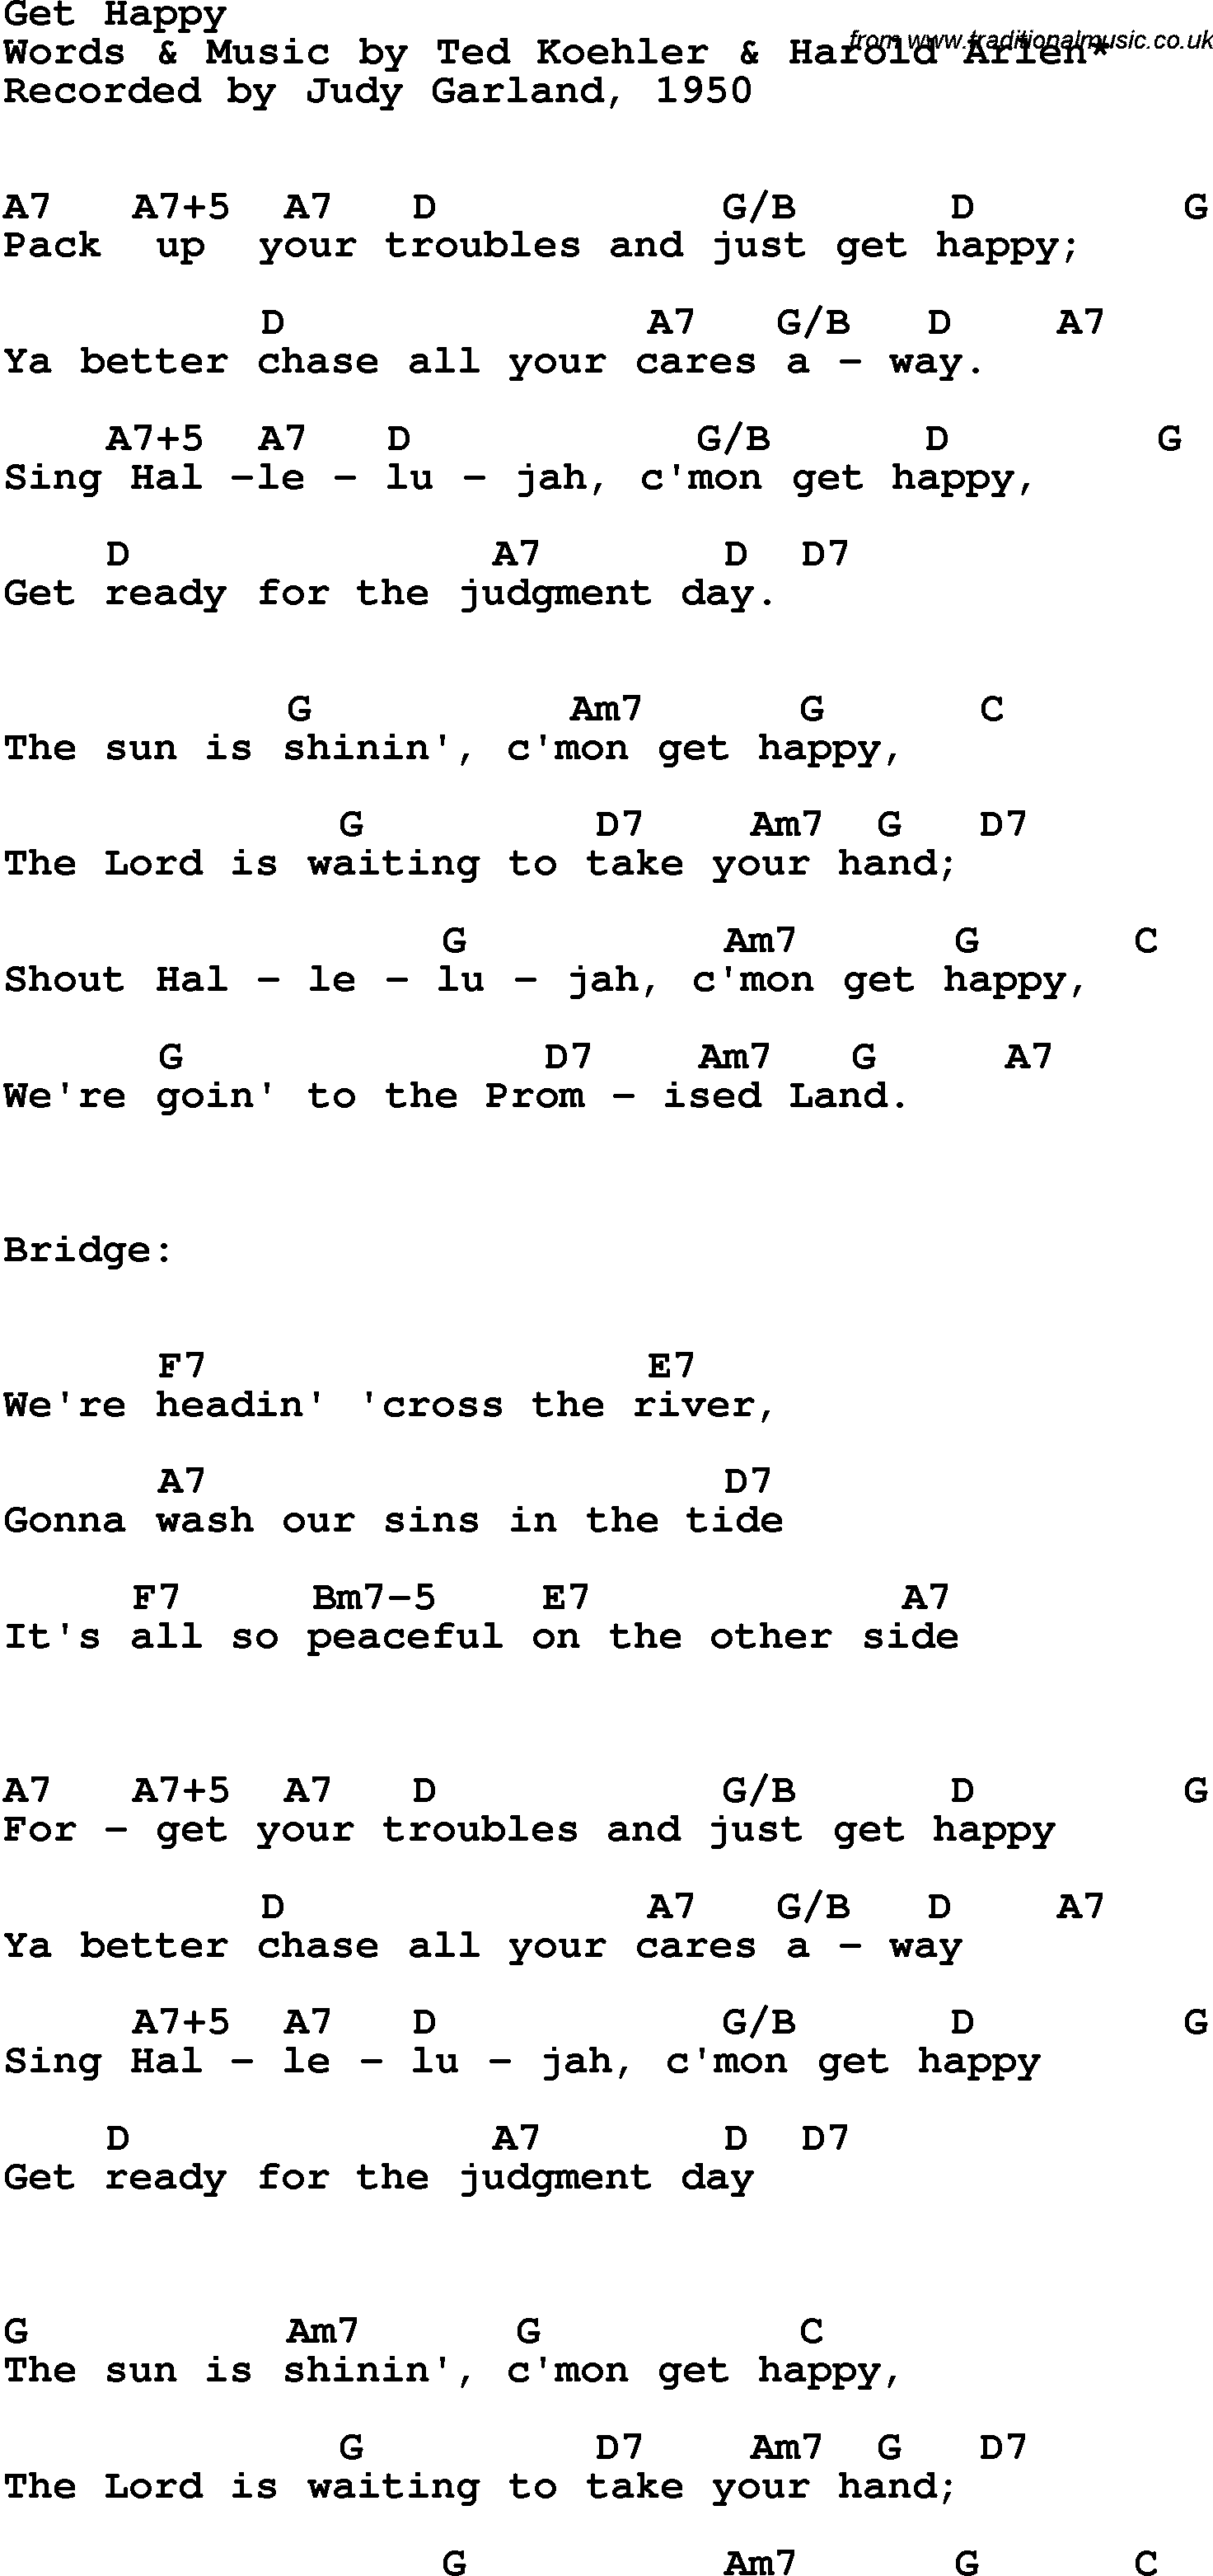 Song Lyrics with guitar chords for Get Happy - Judy Garland, 1950